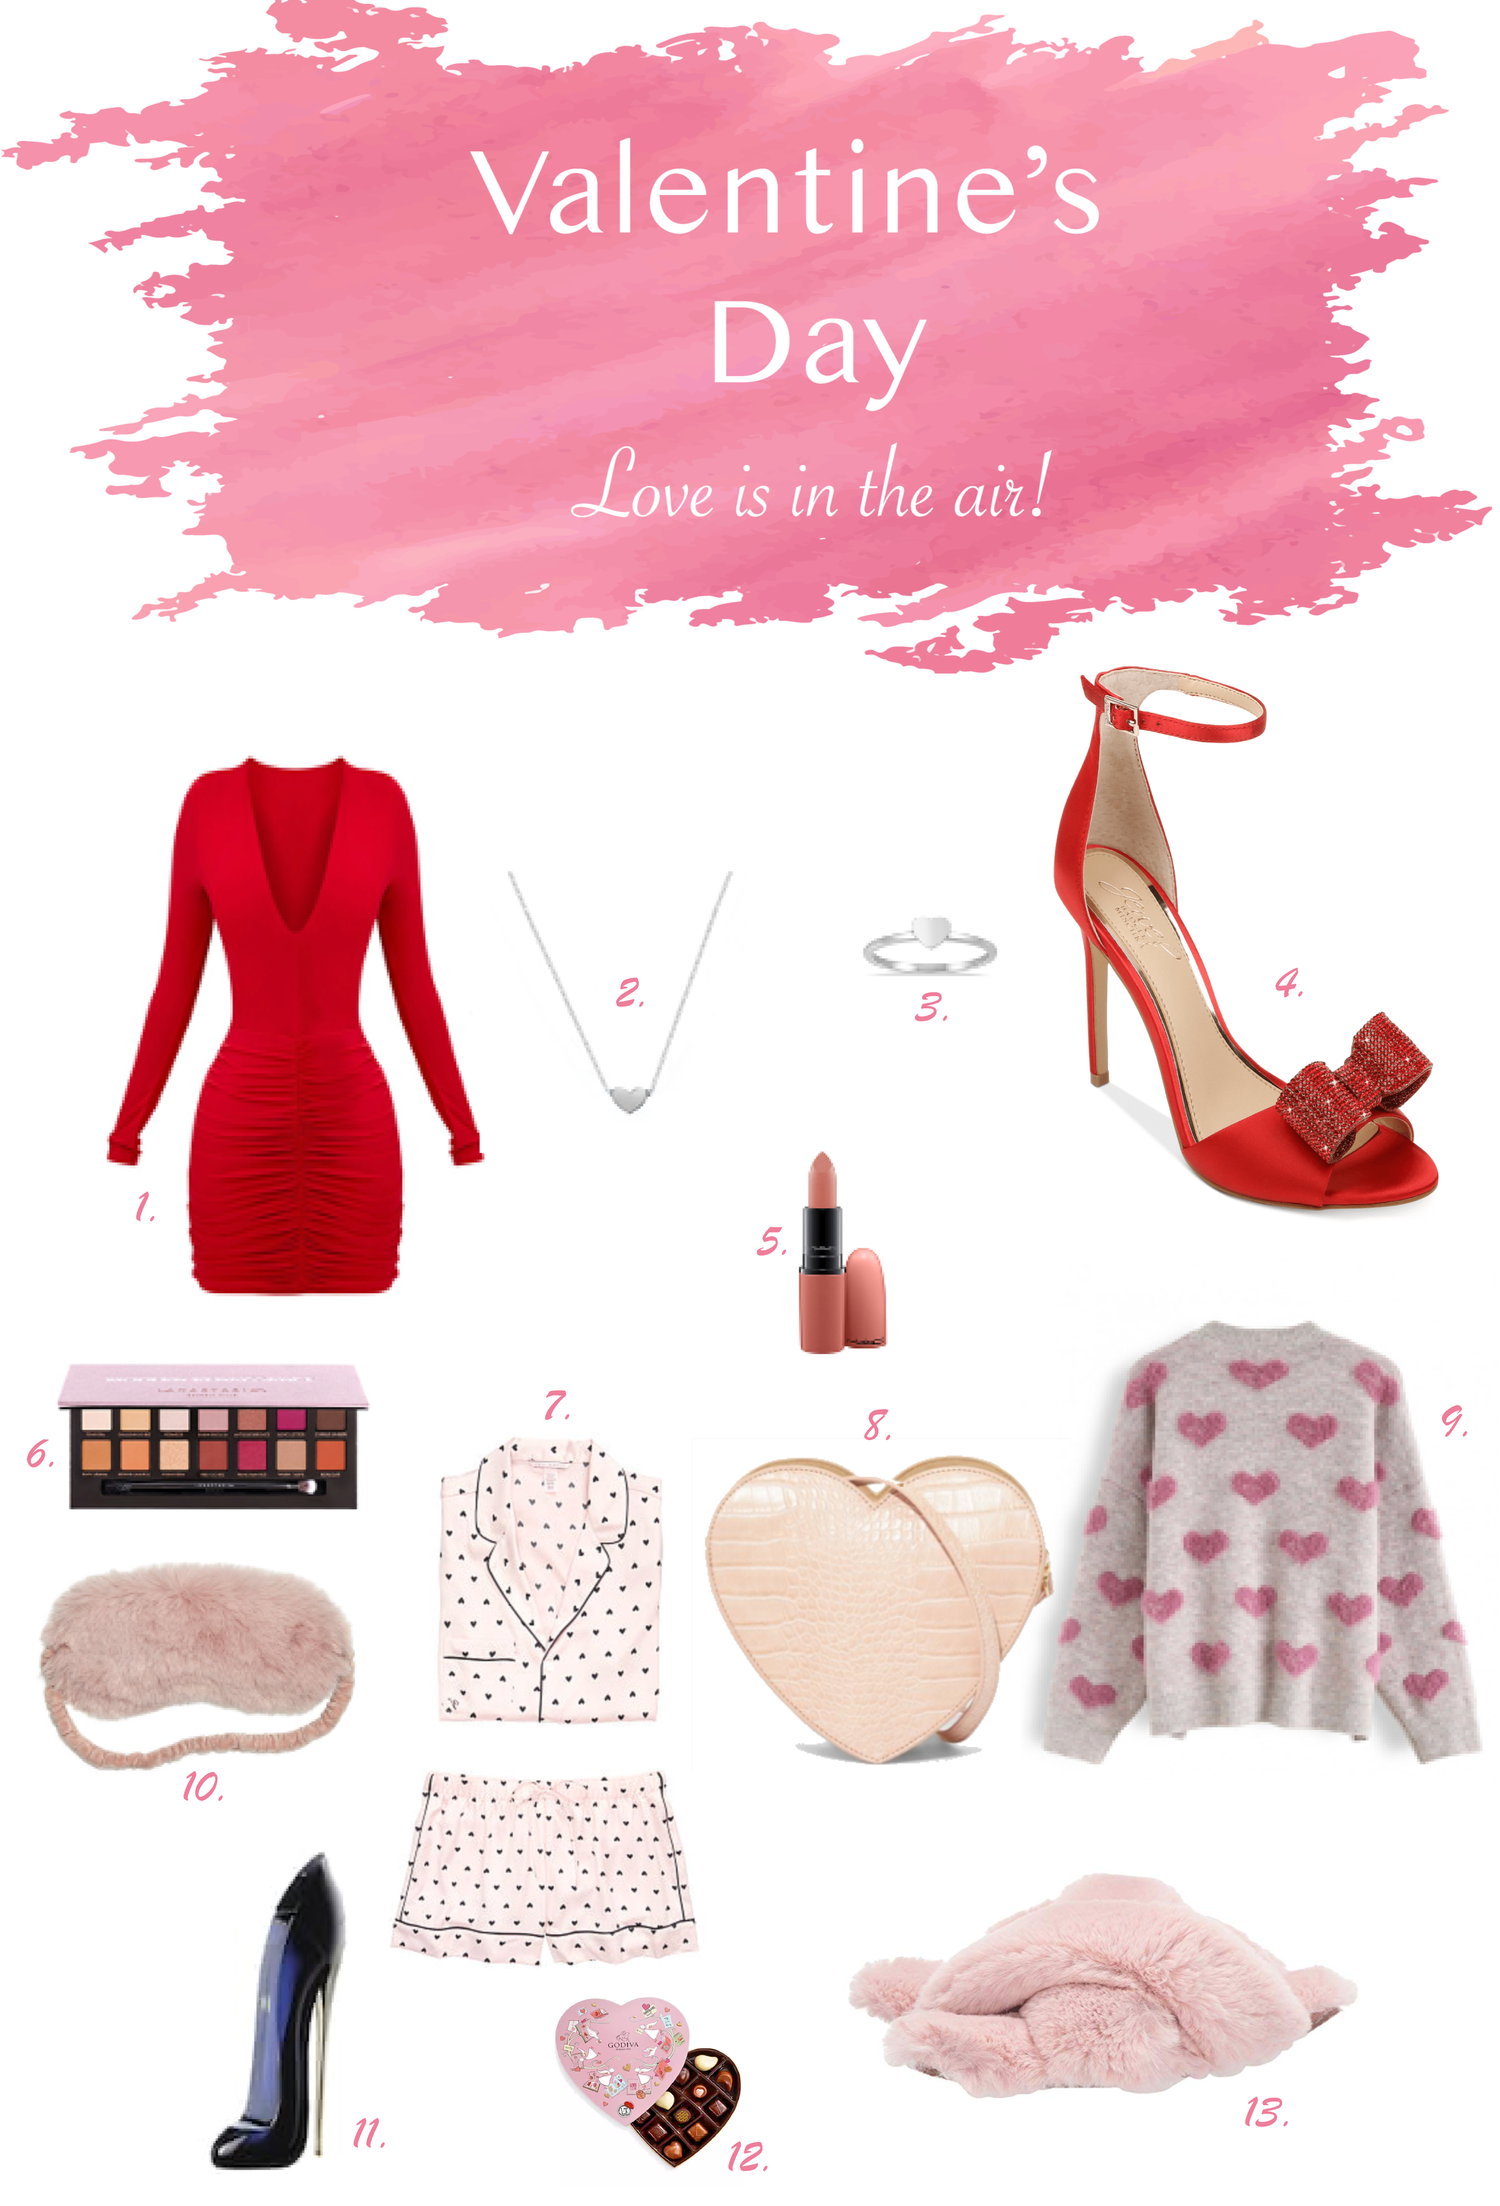 Love Is In The Air! - Valentine's Day Gift Guide 2020